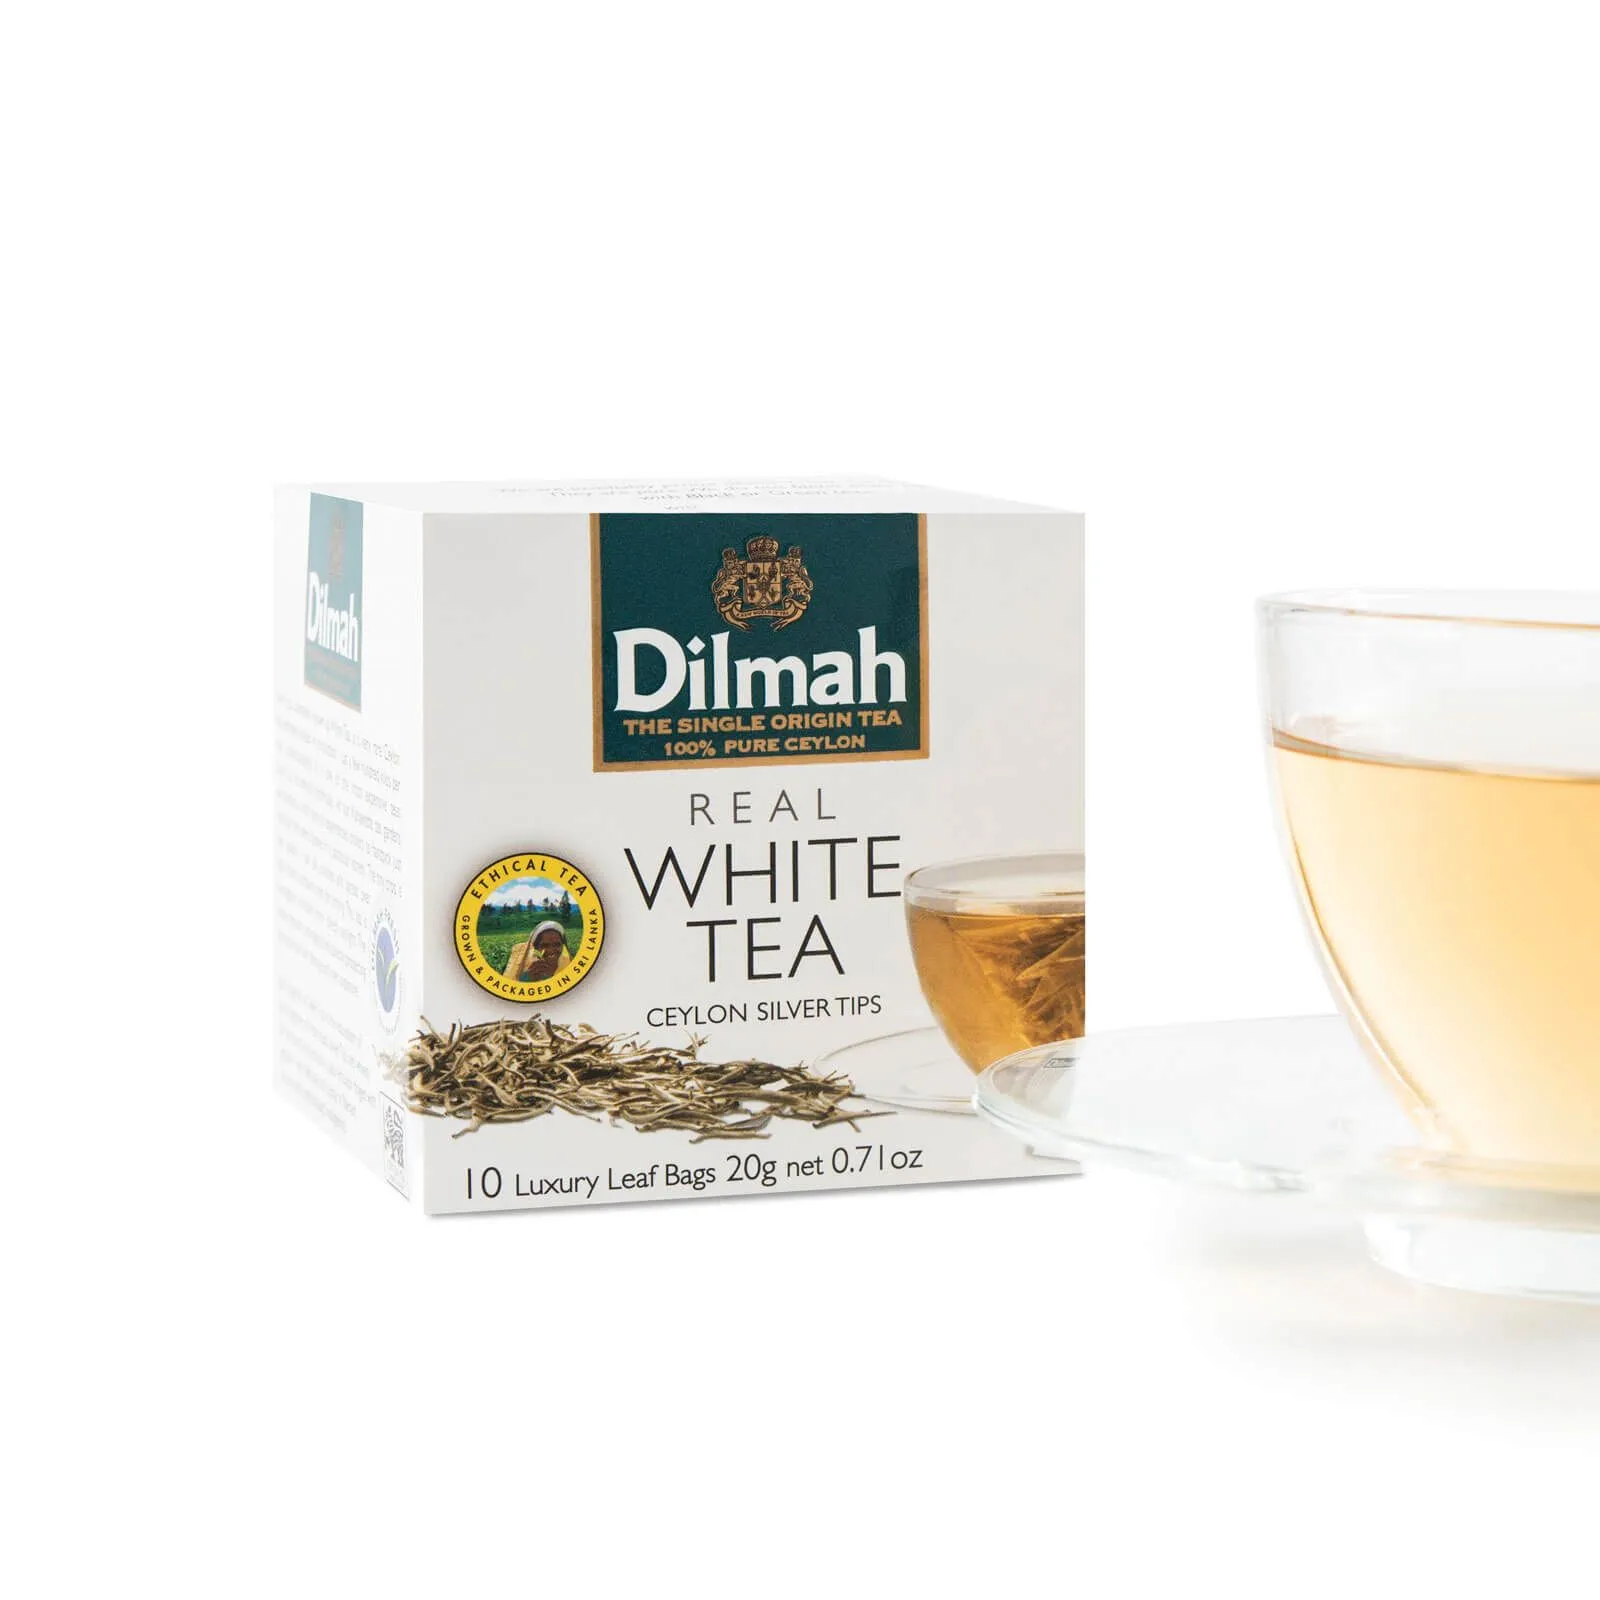 White tea in its packaging with a cup of white tea